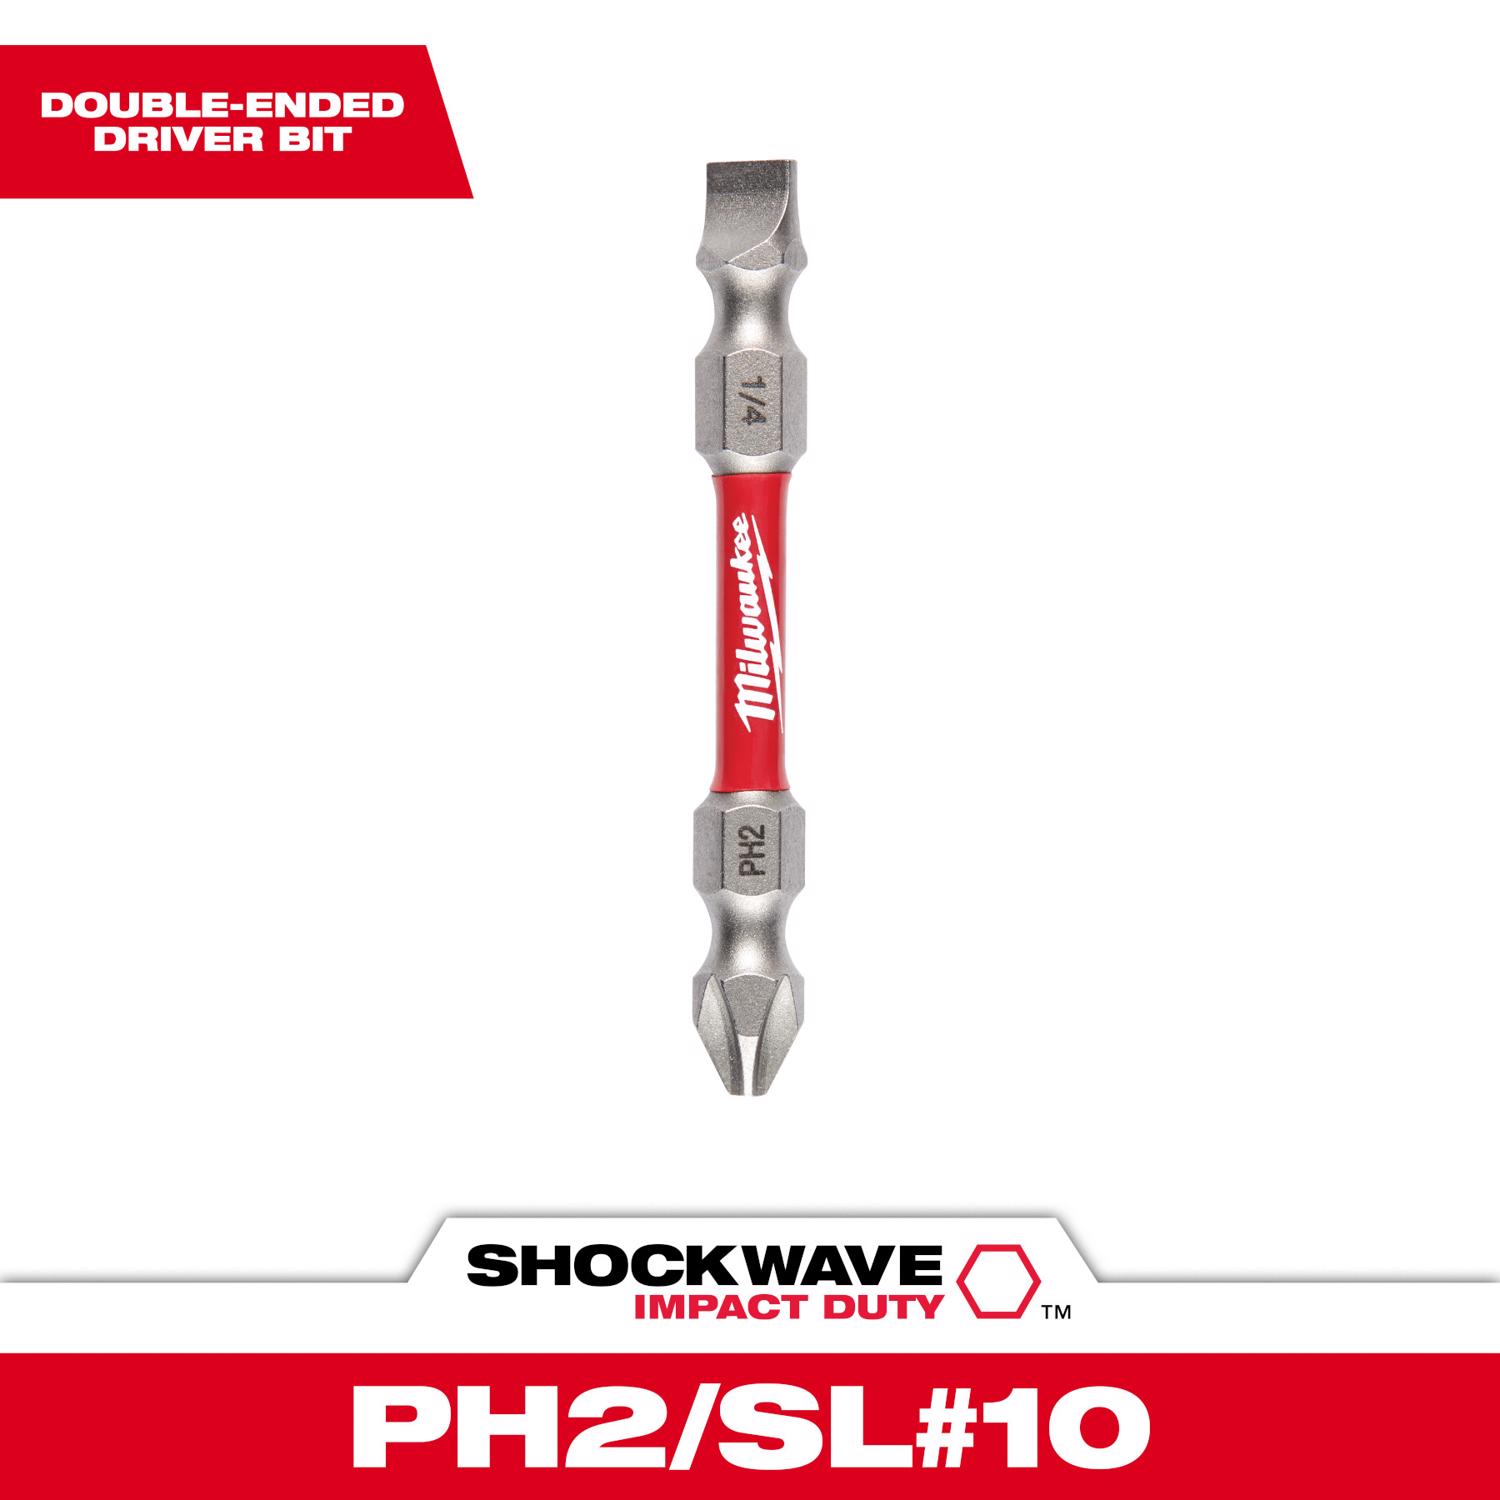 Photos - Drill Bit Milwaukee Shockwave Phillips/Slotted PH2/SL#10 X 2-3/8 in. L Impact Double 